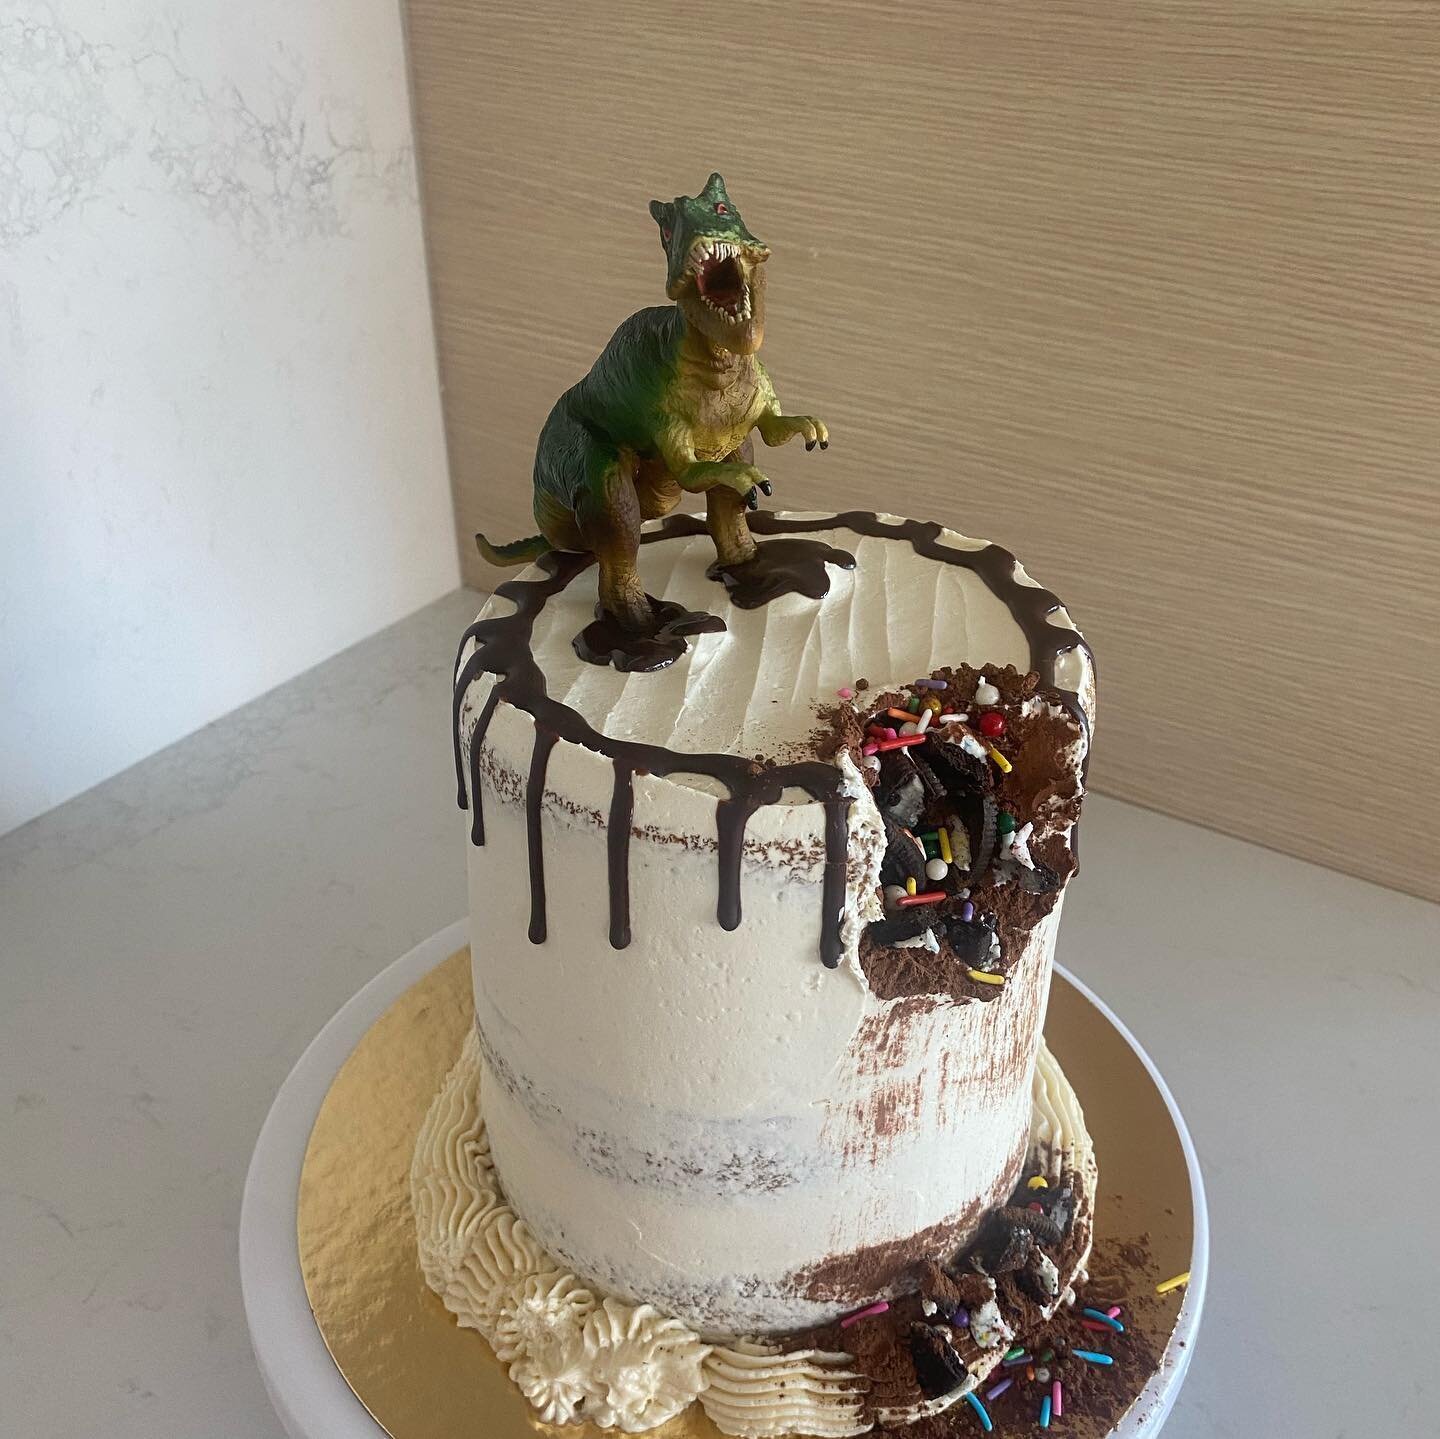 Uh oh- it appears someone attacked the cake! 😮🦖 Hopefully this 5th birthday is still a success 😉🦕🎂
-
#VeganBirthdayCake #PlantBasedCake